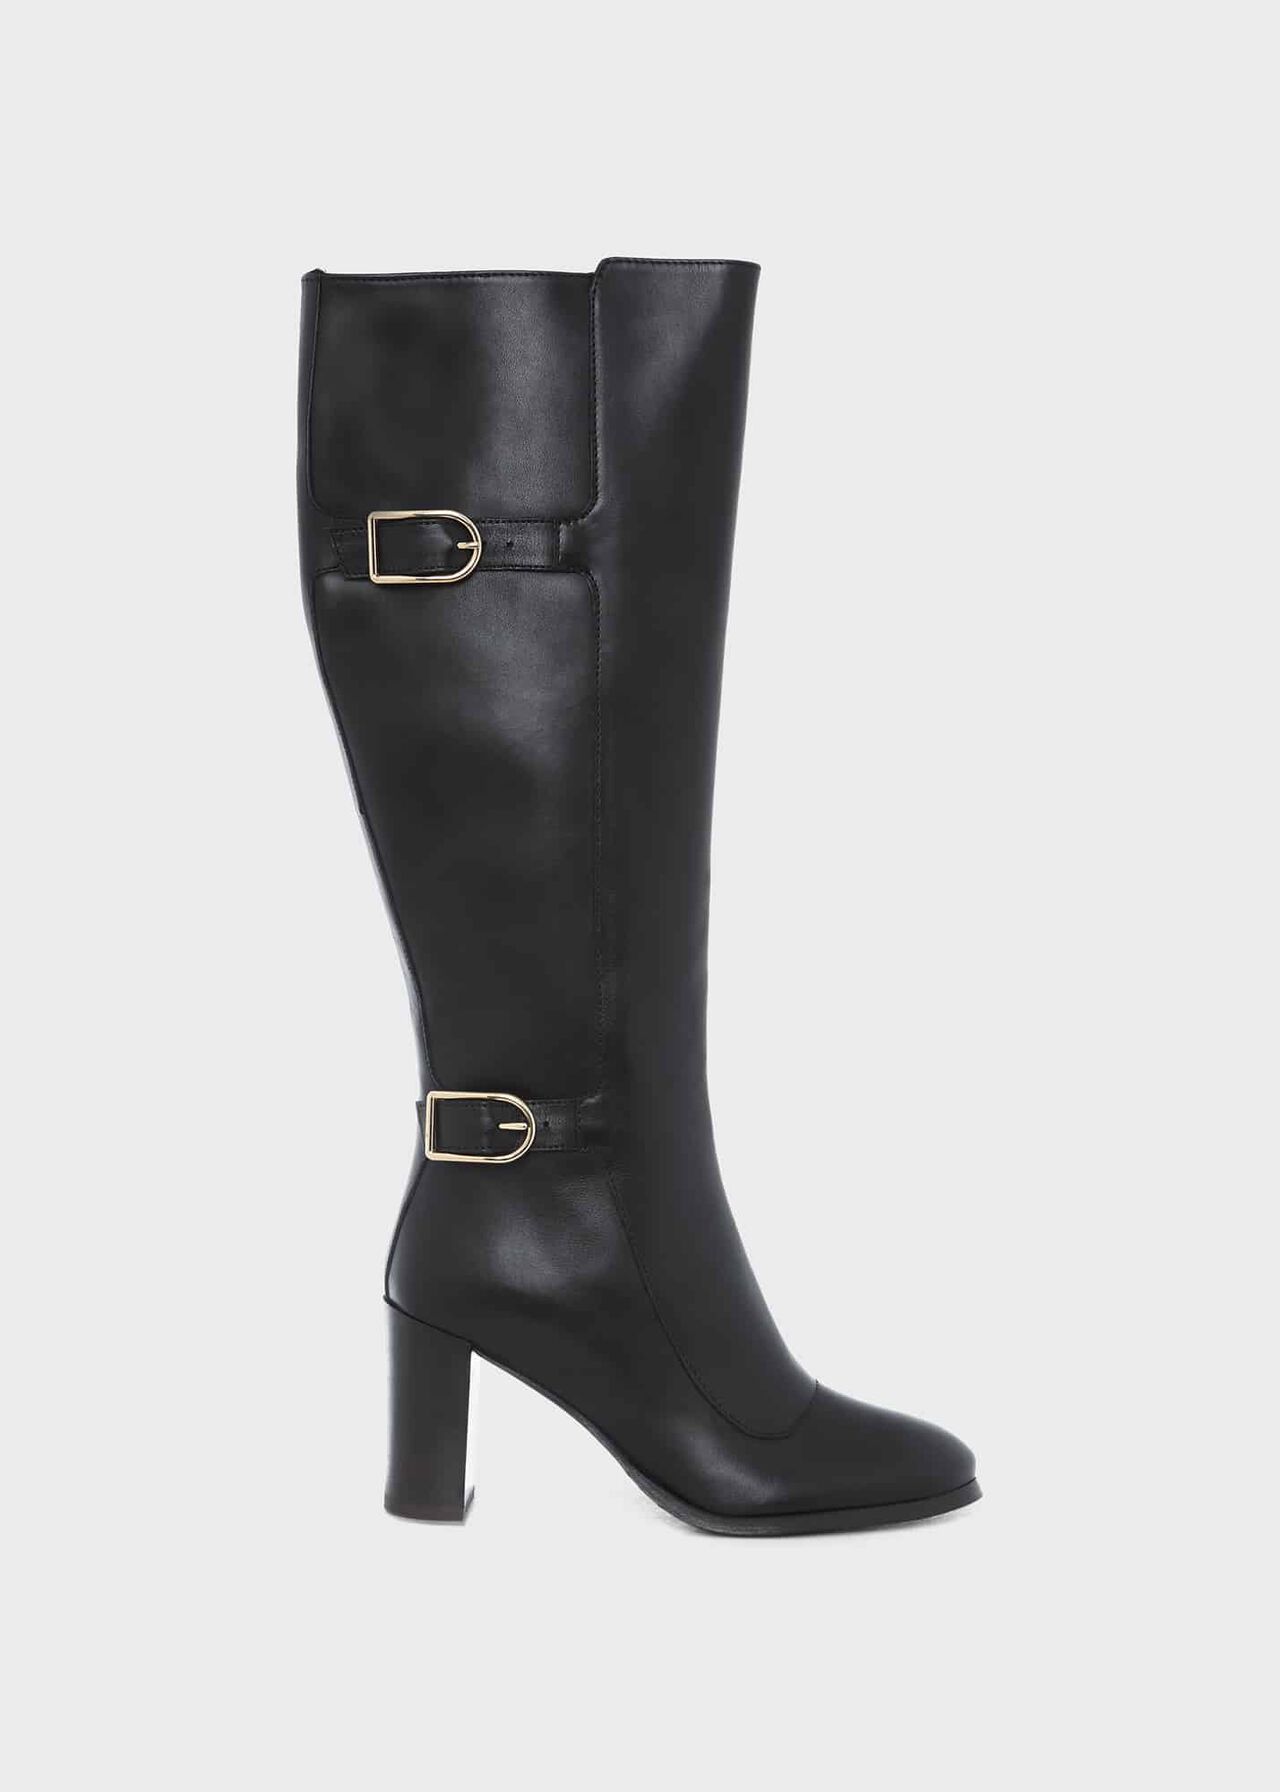 Nell Long Boot, Black, hi-res